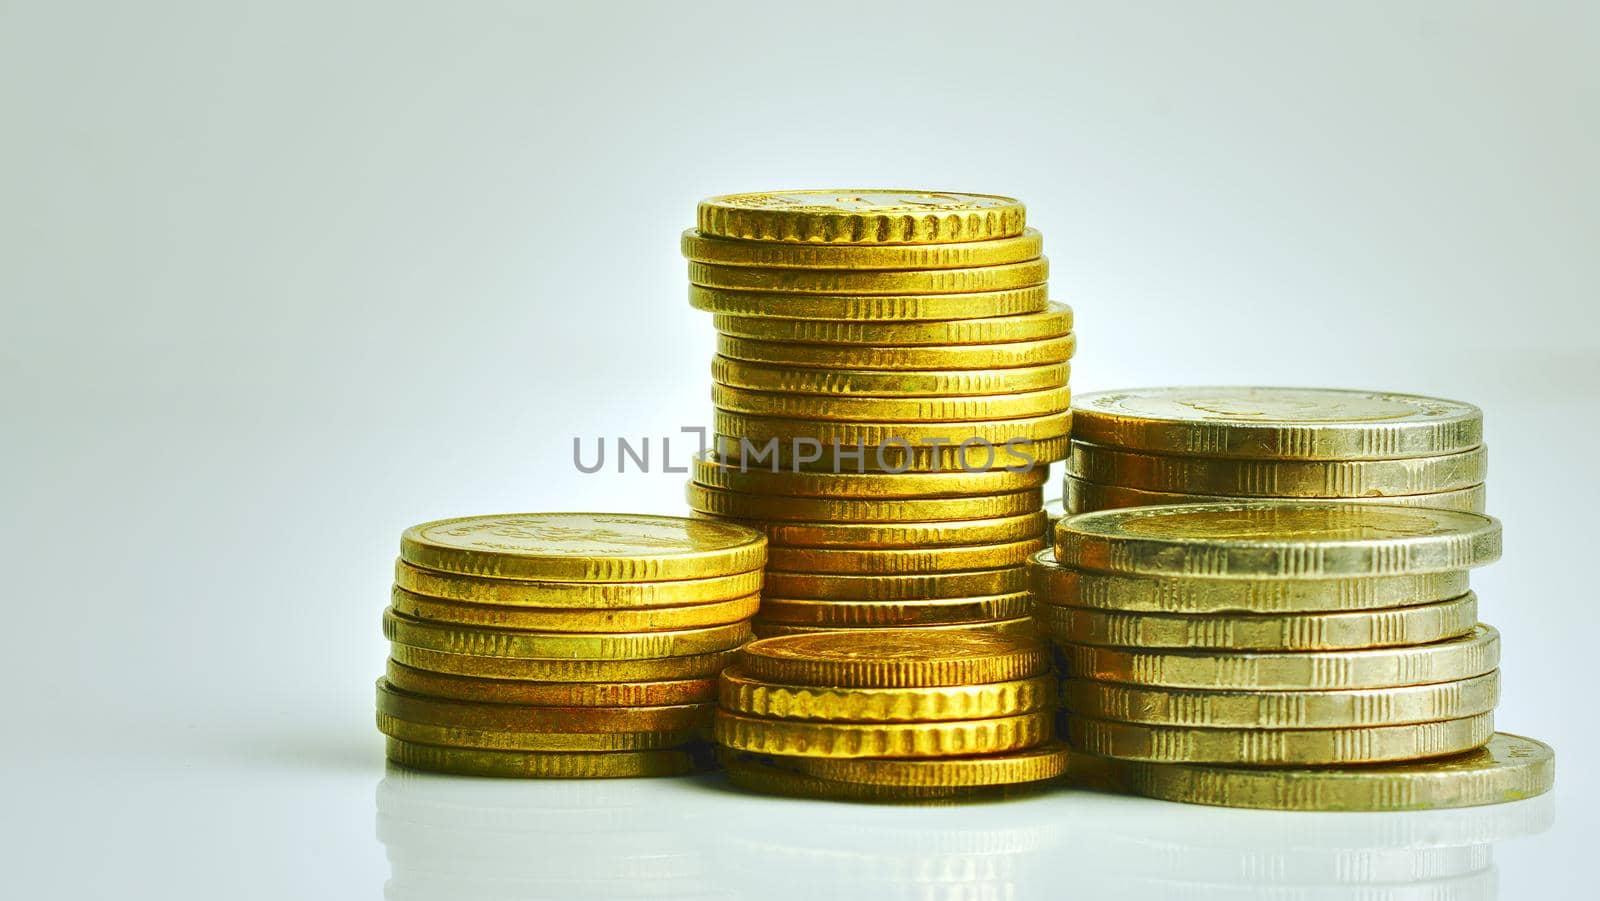 Dollar and Thai baht coins are stacked separately on white background, copy space available. by noppha80